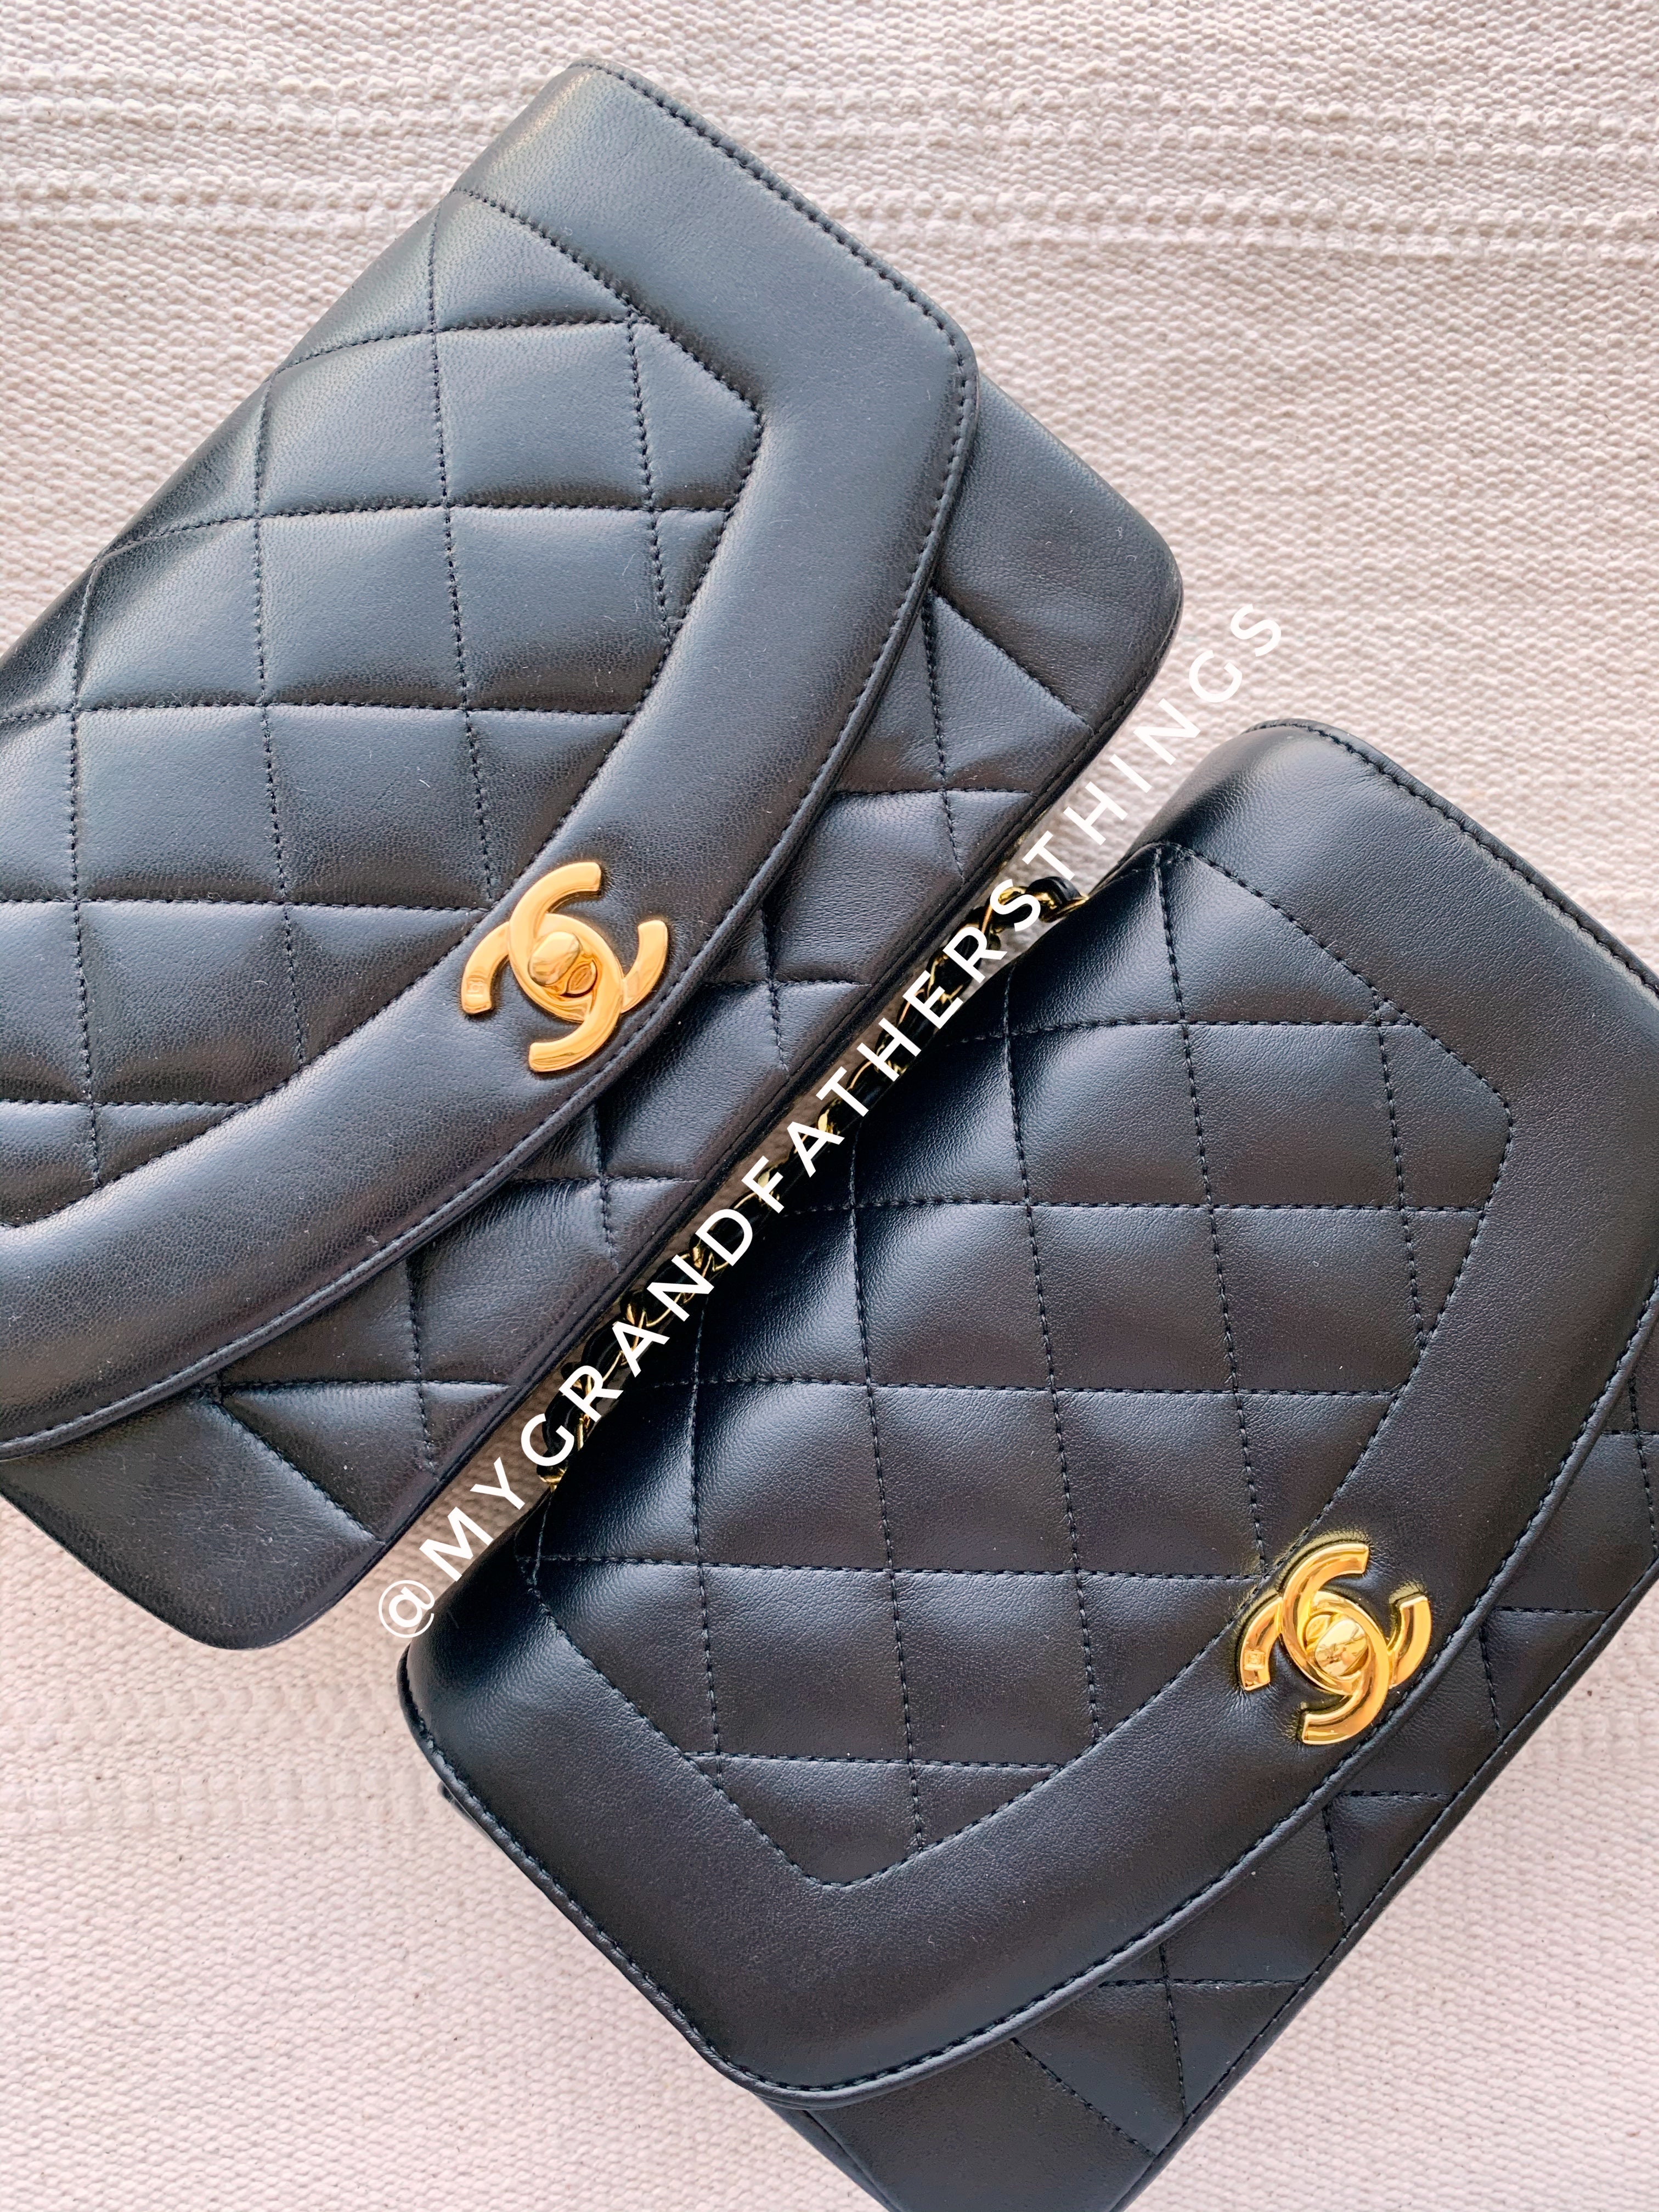 CHANEL, Bags, Sold Authentic Vintage Chanel Princess Diana 25